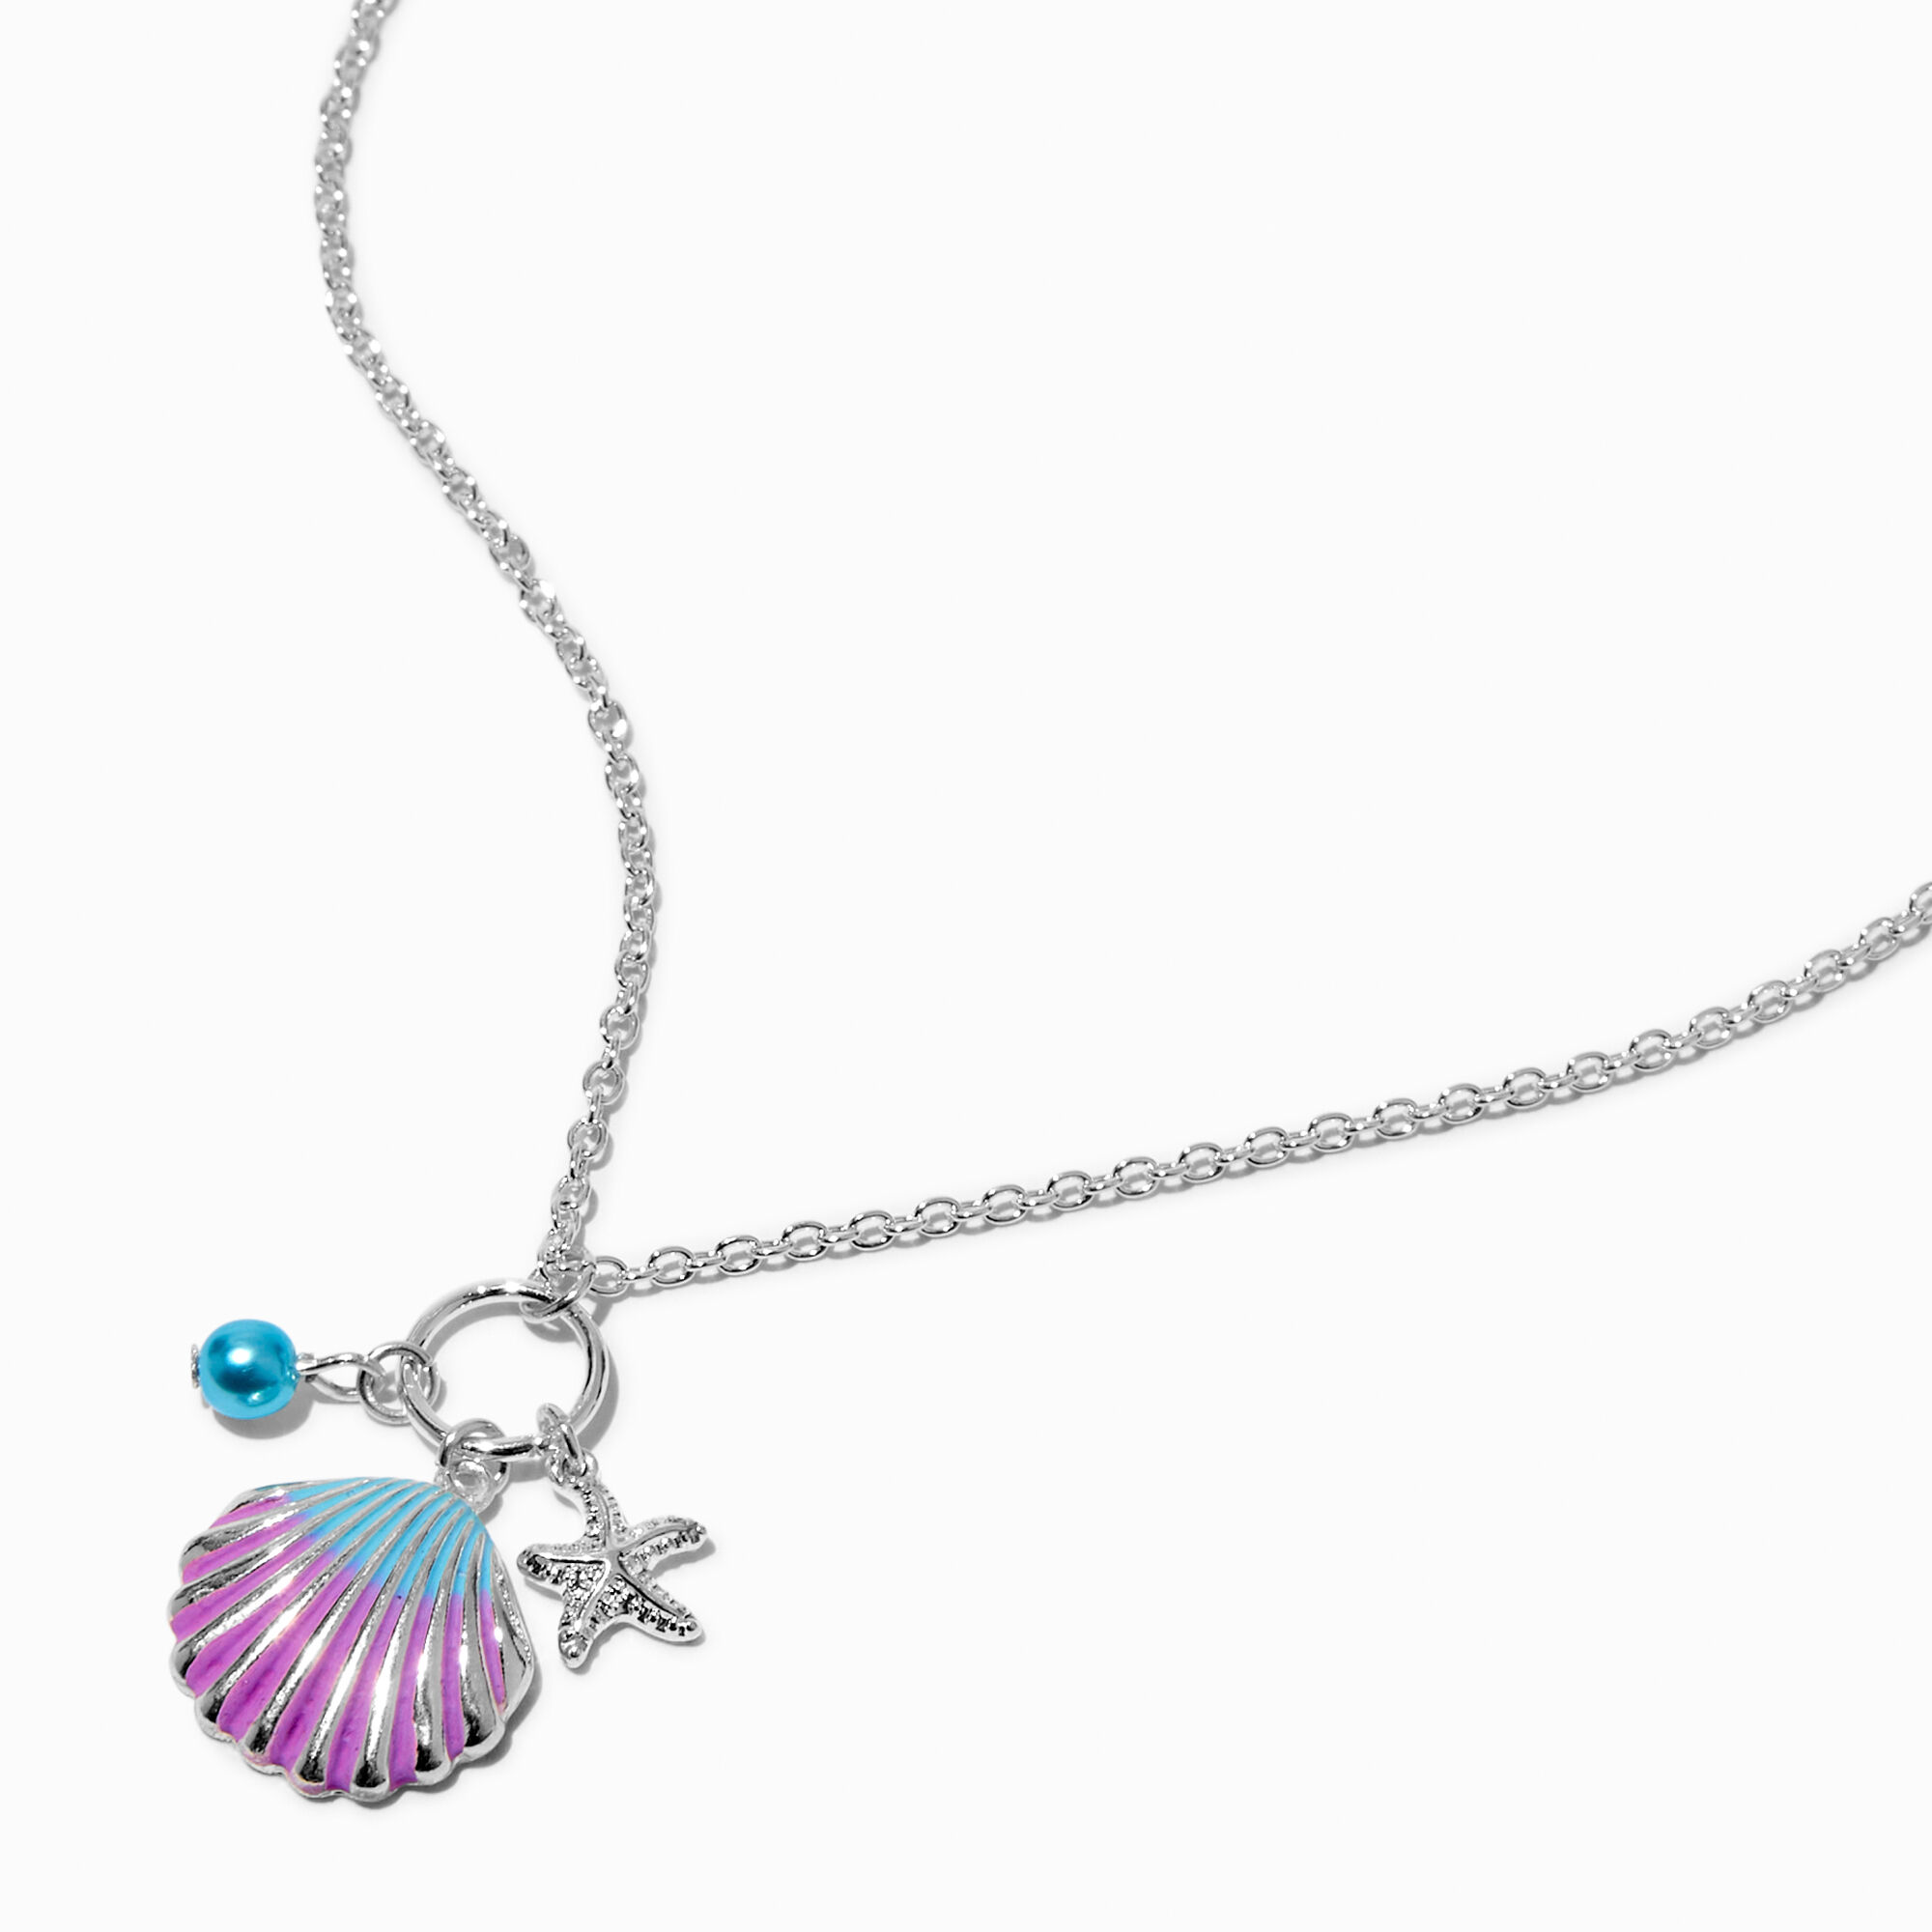 View Claires Ombre Clamshell Pendant Necklace Silver information